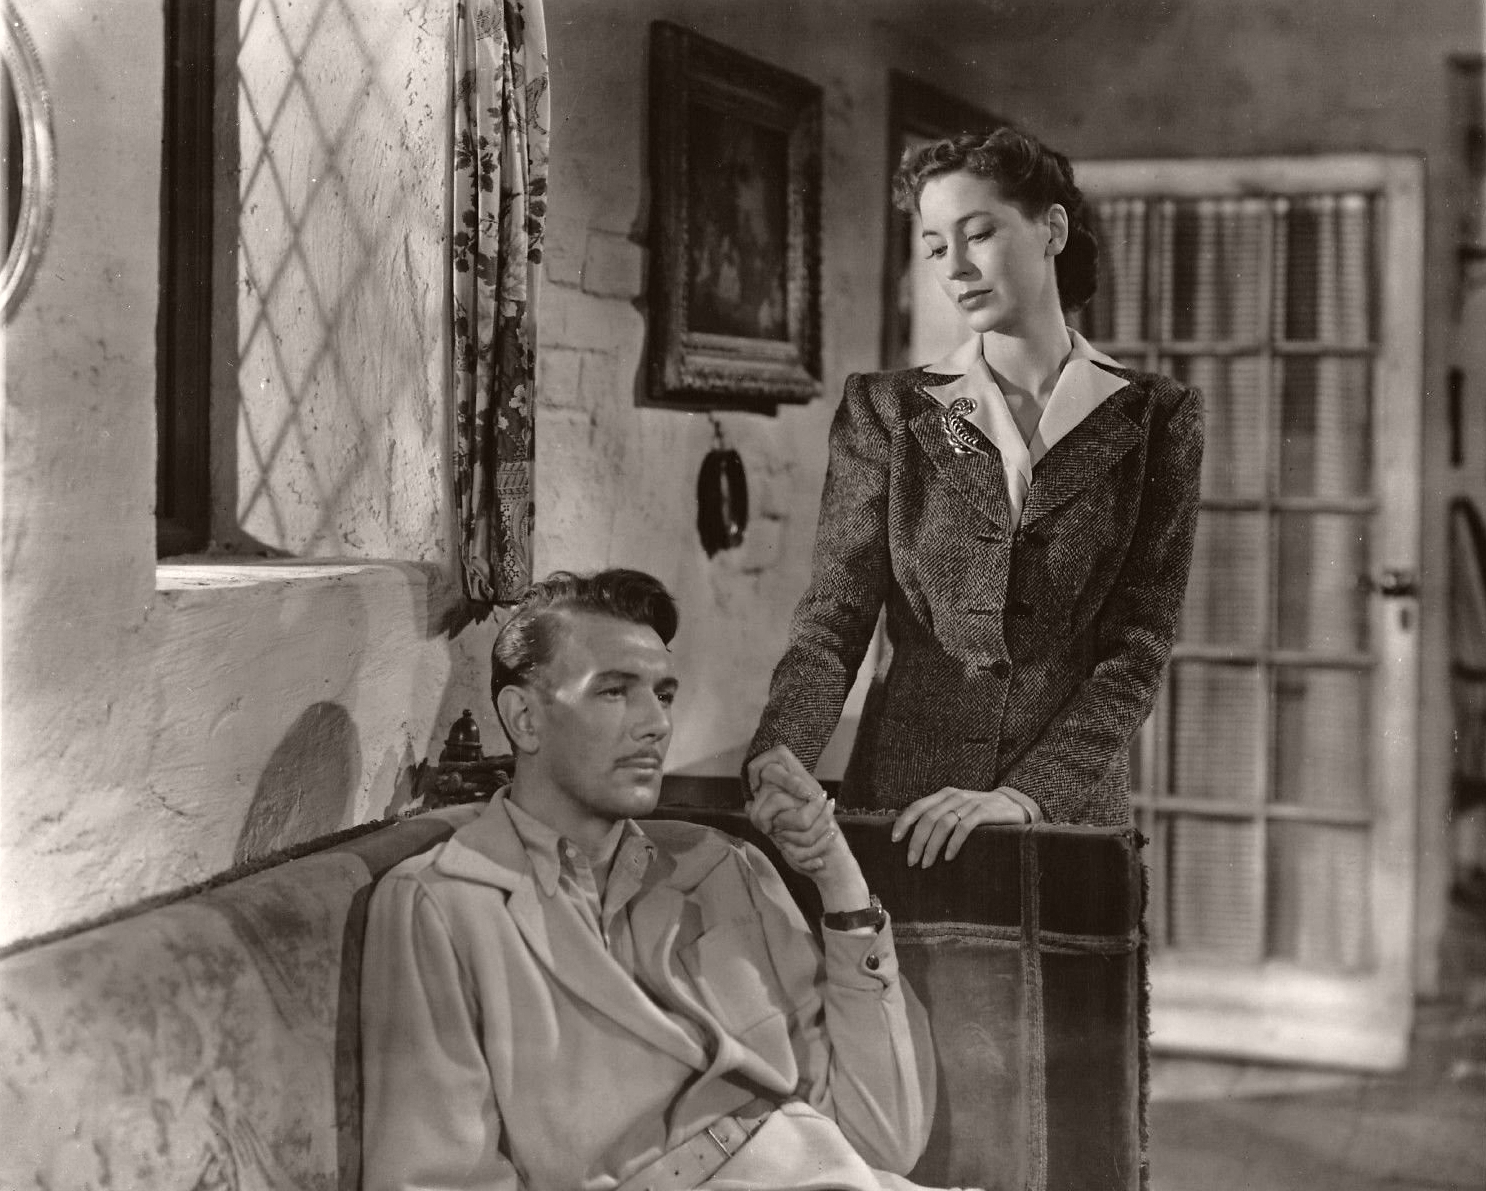 Photograph of The Years Between (1946) (1) featuring Michael Redgrave and Valerie Hobson